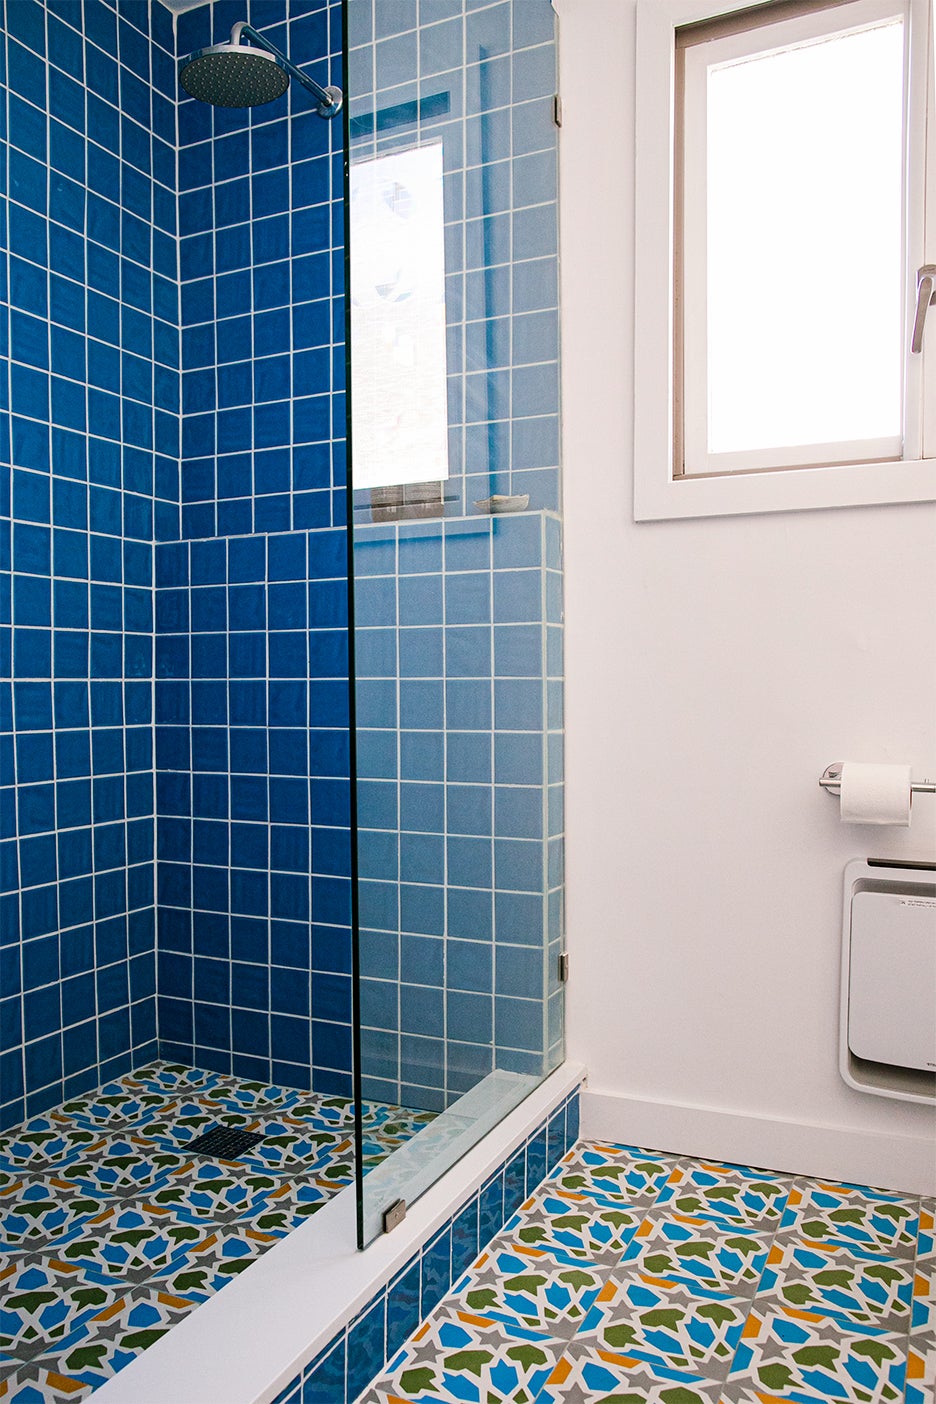 Blue tiled bathroom with white walls